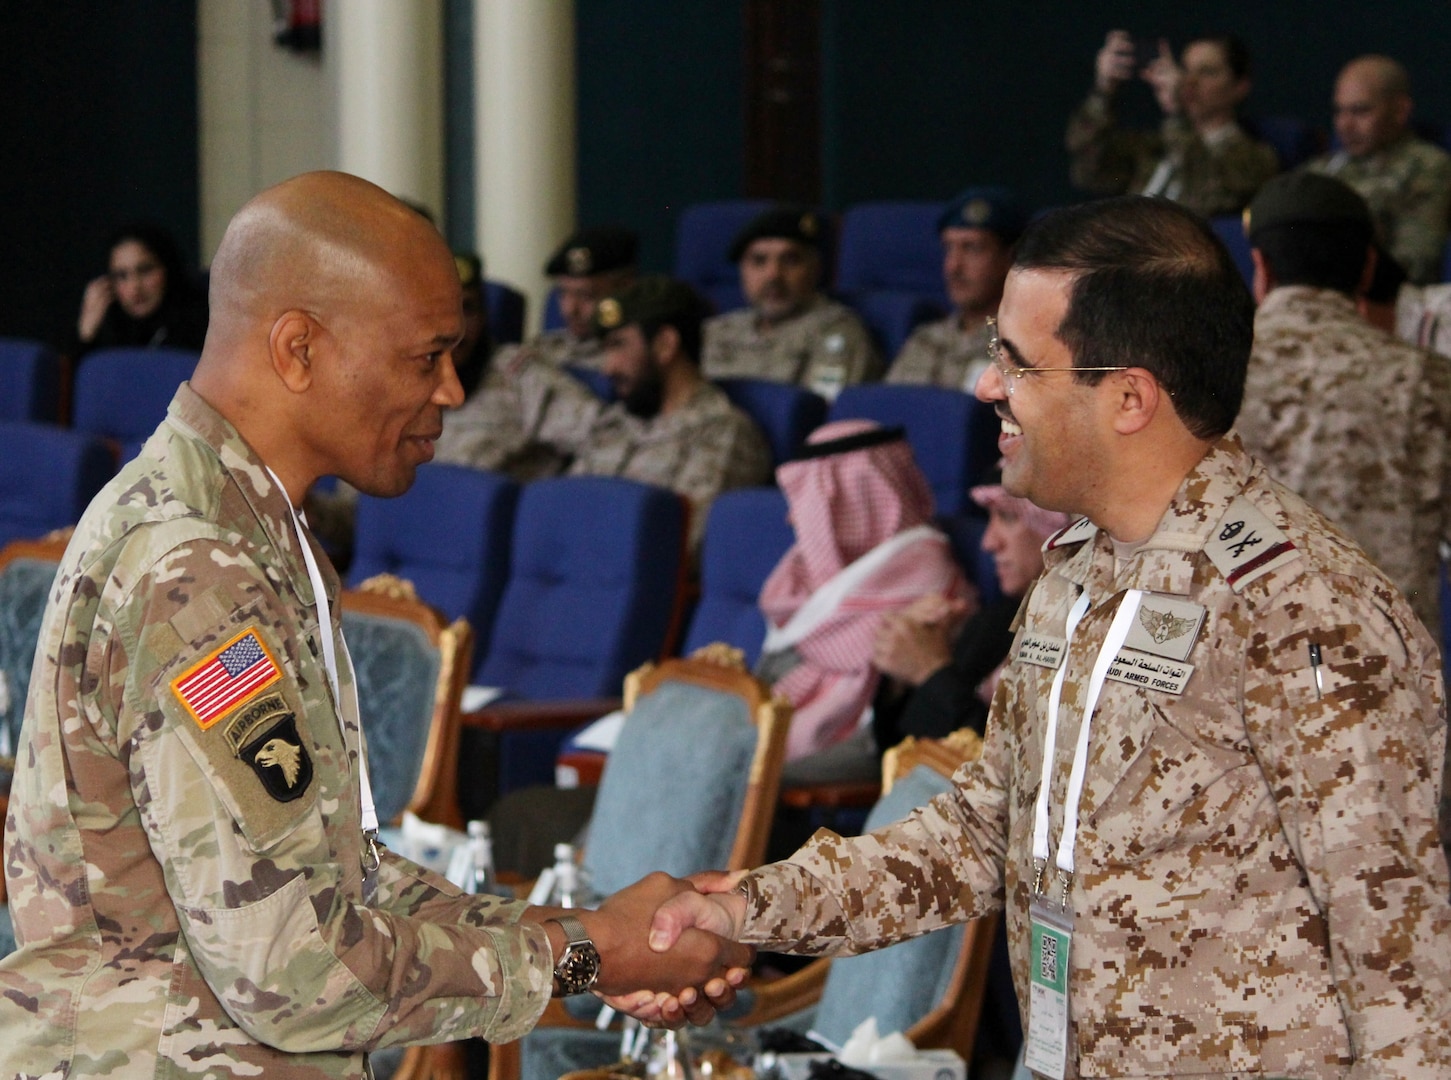 U.S. Central Command’s Command Surgeon, left, shakes hands with a Royal Saudi Land Force officer at the Multinational Medical Response Training in Riyadh, Saudi Arabia, Feb. 11-13, 2024. Opened to both military and civilian personnel of U.S. partner states in the CENTCOM area of responsibility, the biennial event will feature speakers, workshops, exhibit displays, and a capstone field training exercise showcasing emergency medical readiness and response for disaster and humanitarian relief operations.
More than 500 healthcare professionals from 20 partner nations are expected to participate in the building endeavor geared toward establishing medical training that promotes burden-sharing possibilities mutual understanding. (U.S. Central Command)